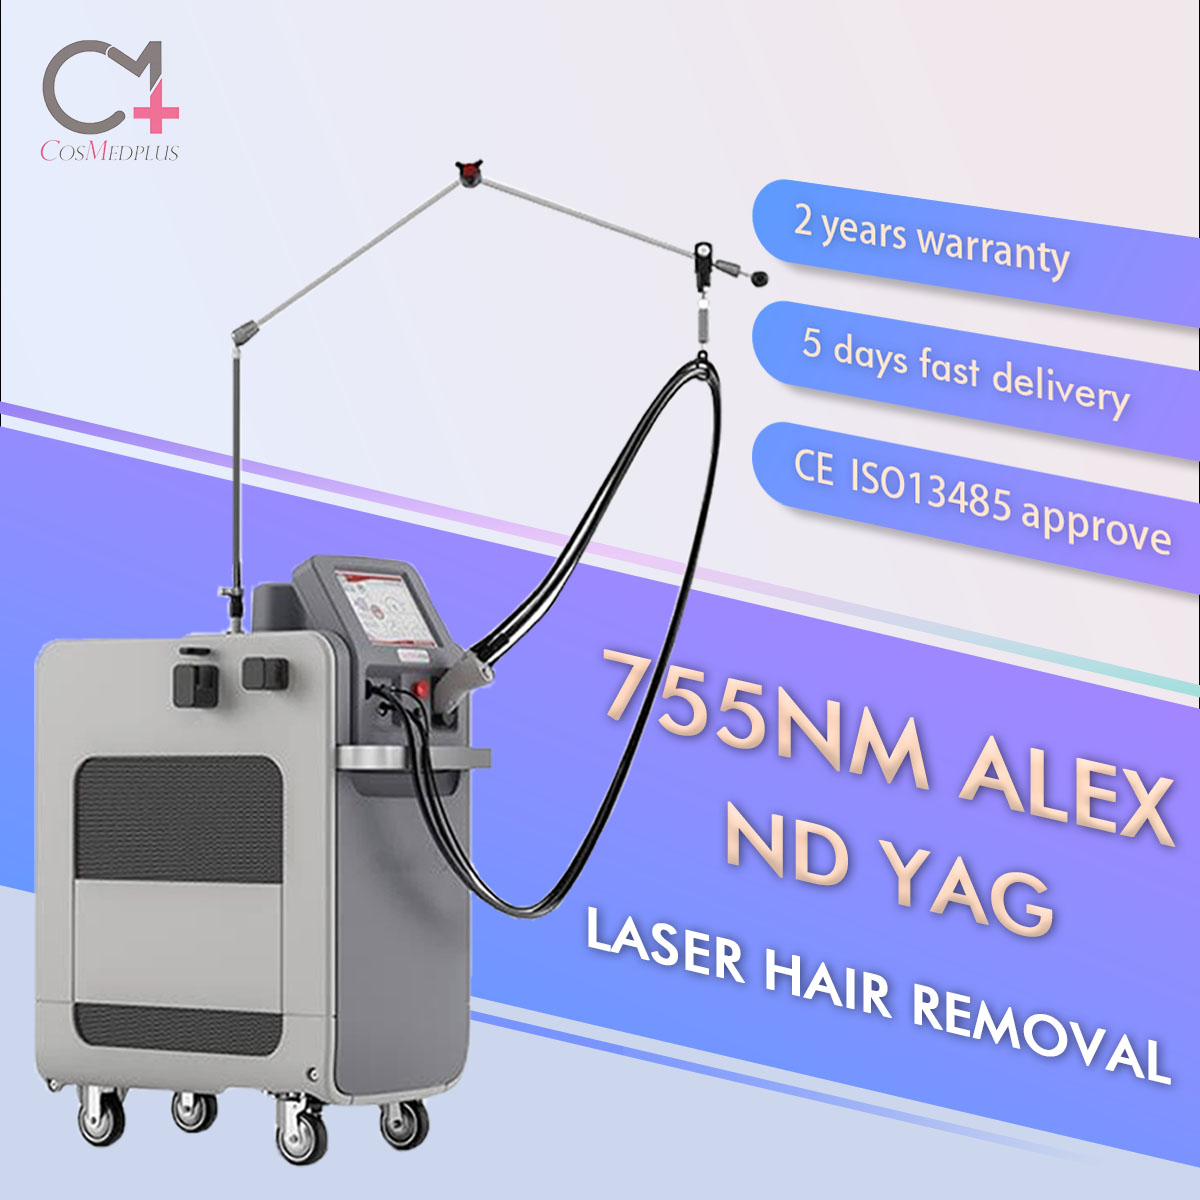 Factory Outlets Nd Yag Laser Laser Hair Remover - 1064NM ND YAG Gentle Laser Hair Removal Machine Max Price CanDela 755NM Alexandrite Laser  – Huacheng Taike